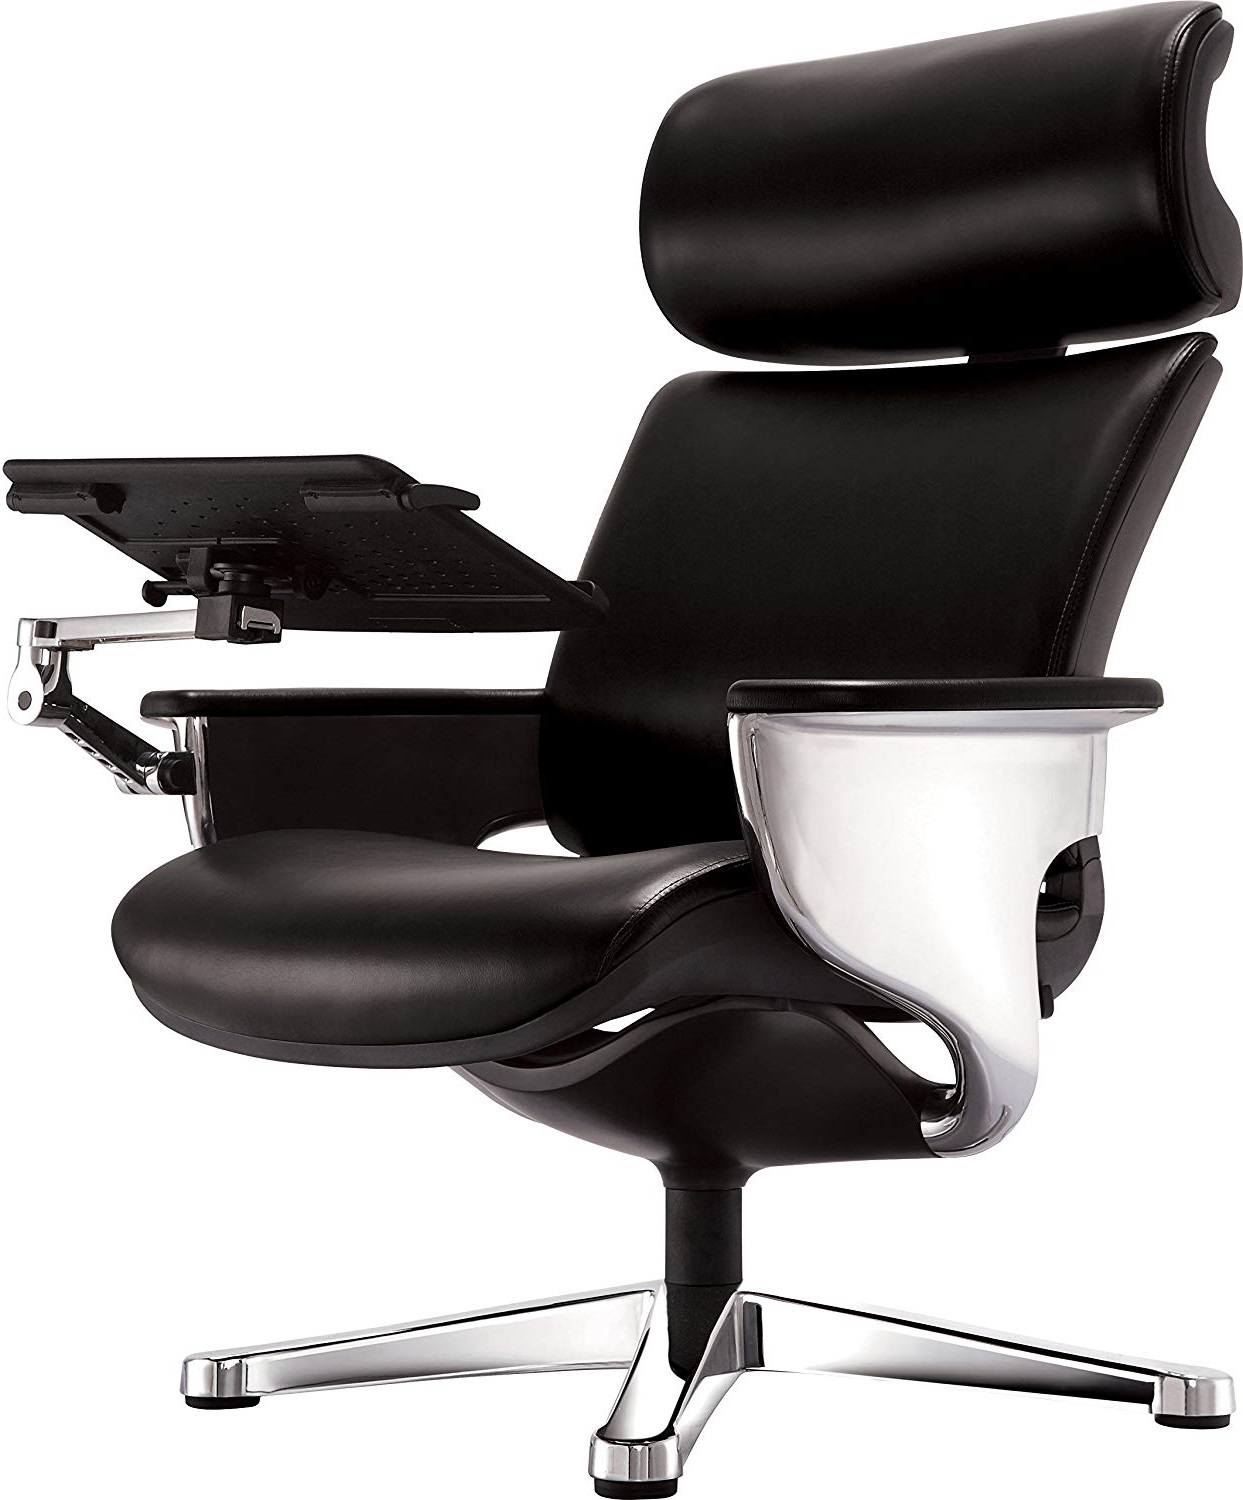 Eurotech Seating Nuvem Chair